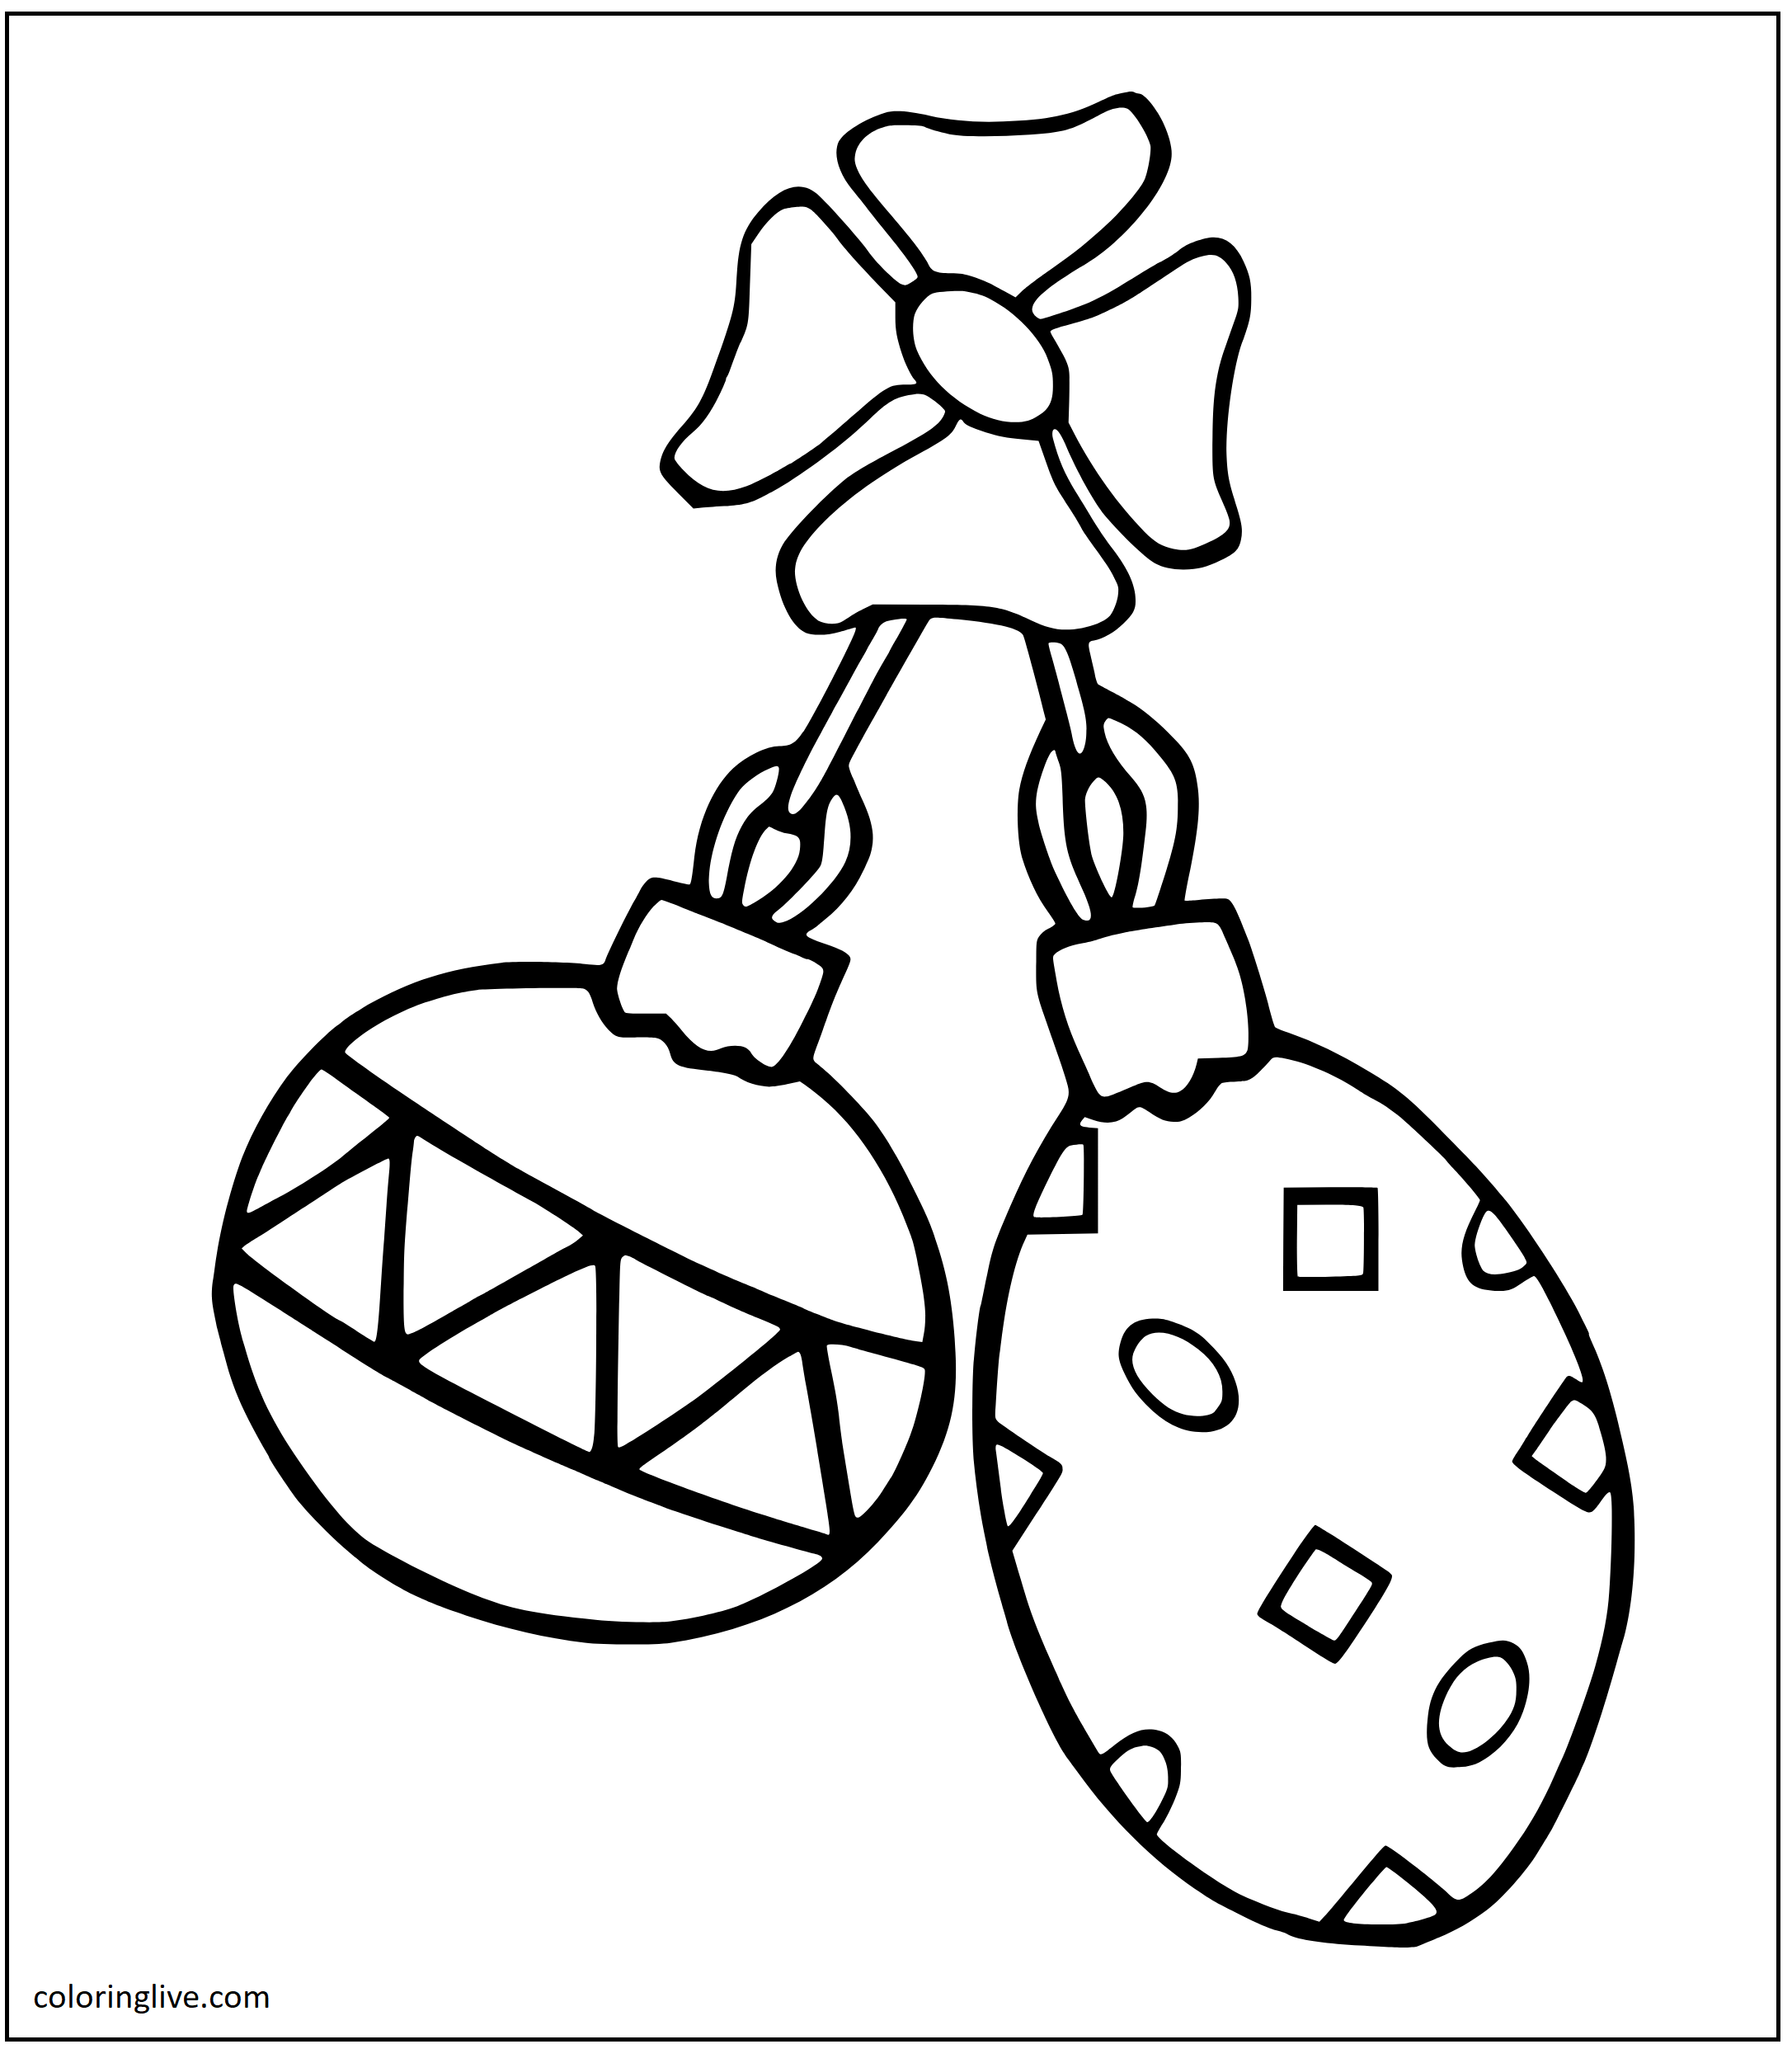 Printable Christmas Ornaments   to color Coloring Page for kids.